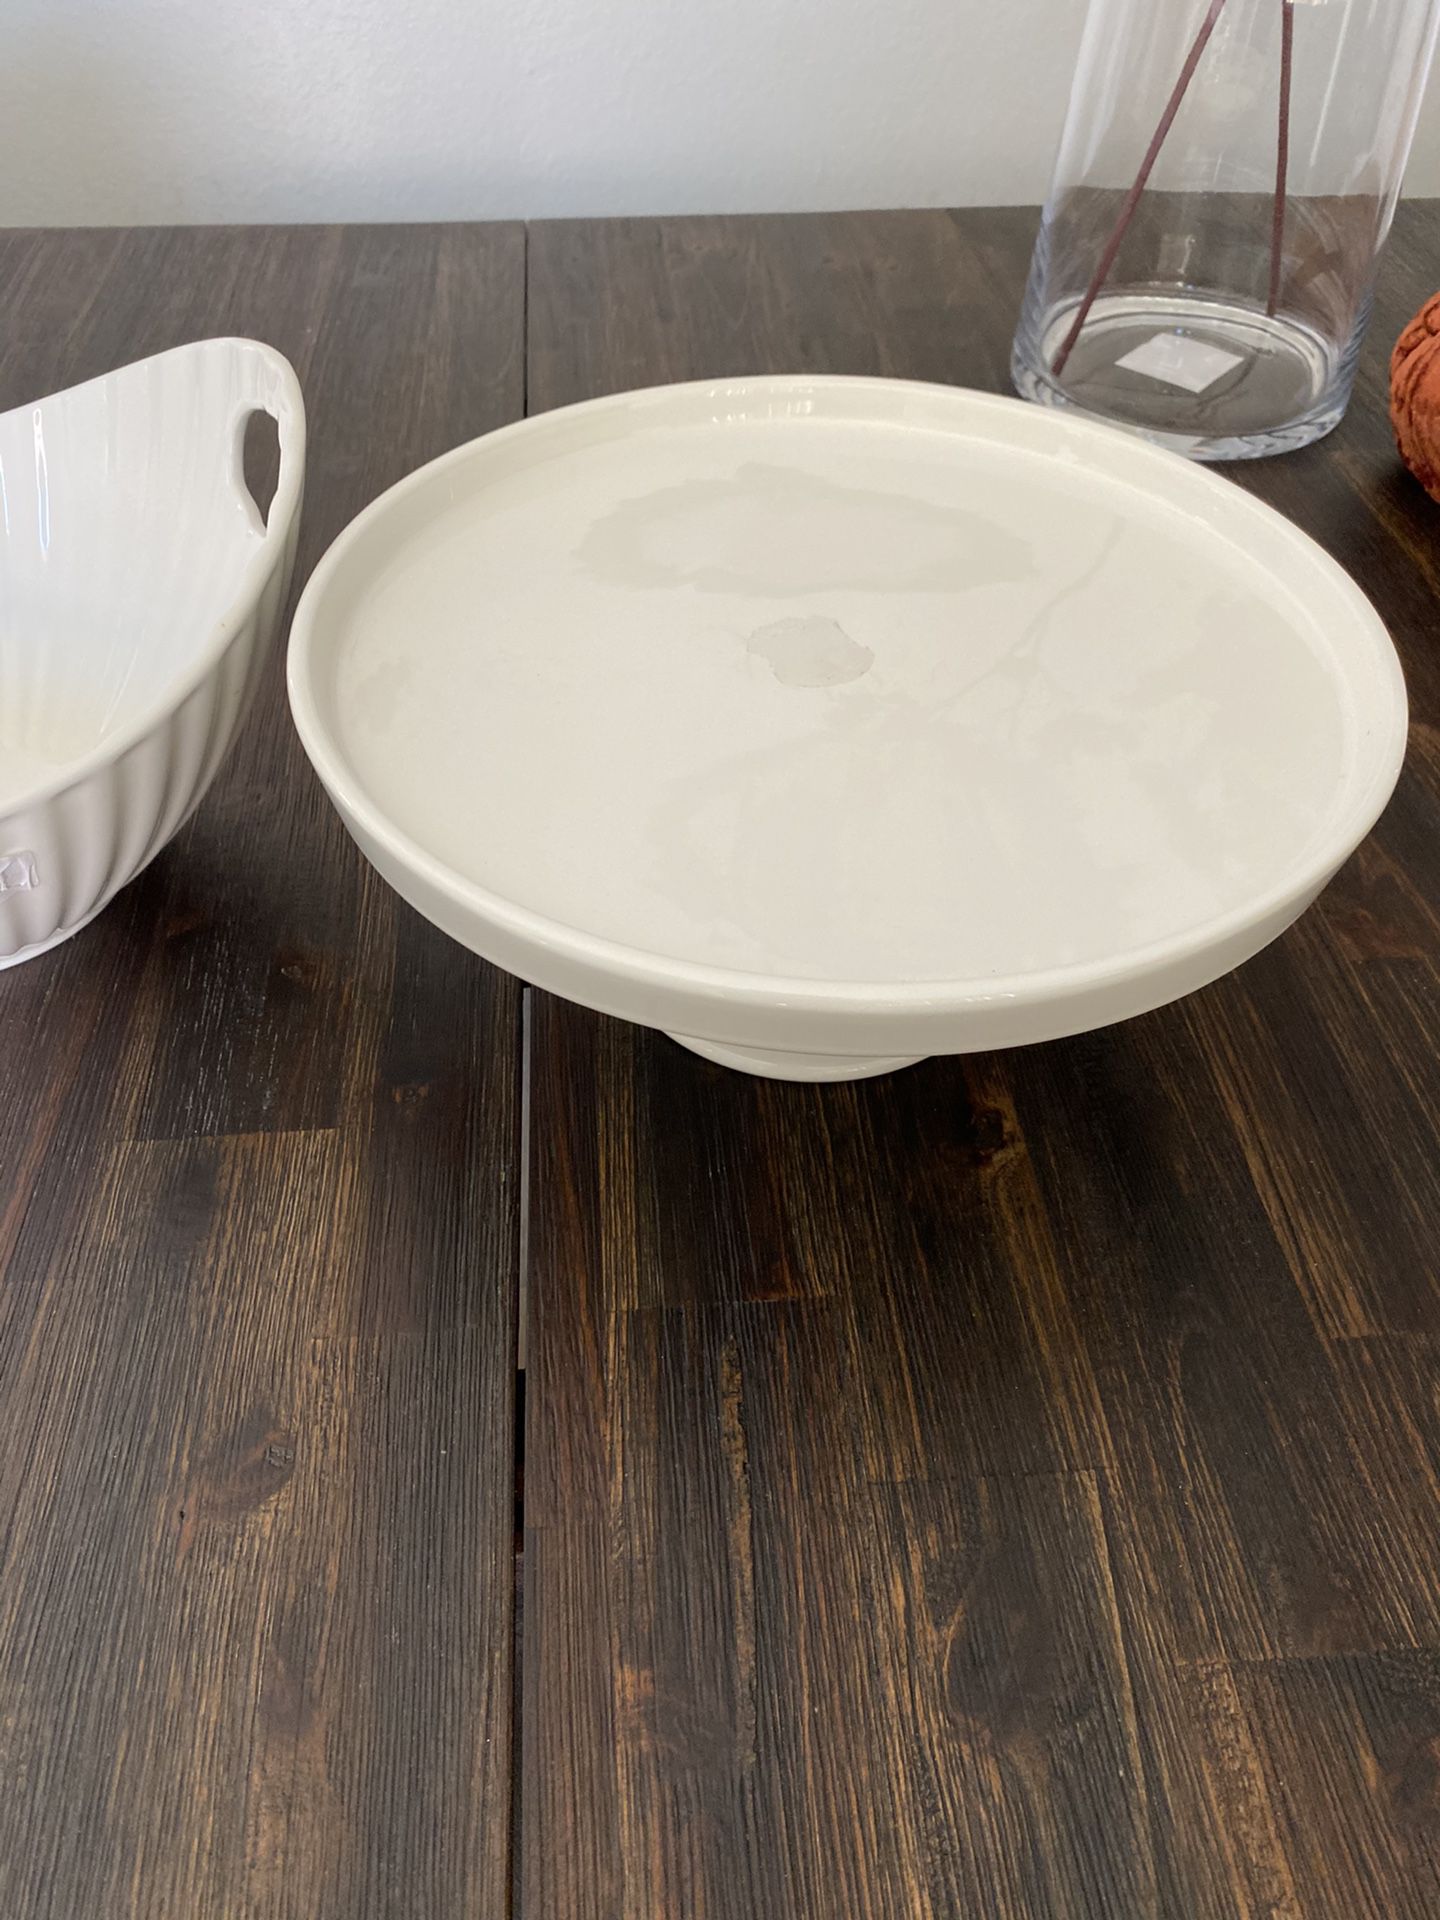 3 Items -cake plate/bowl/serving chiller